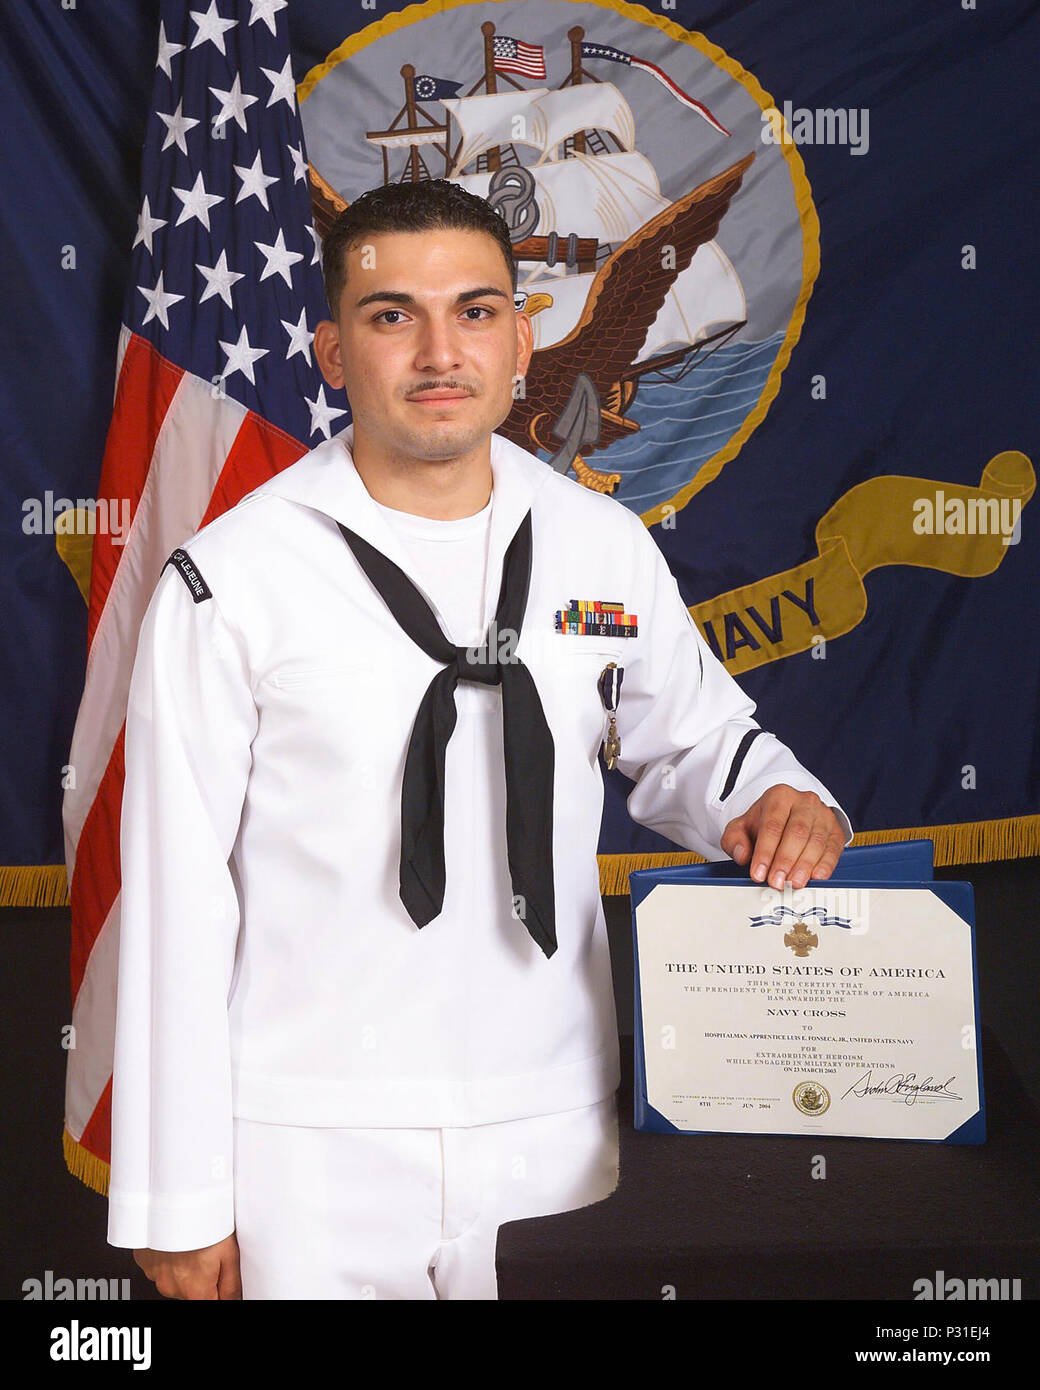 Lejeune, N.C. (Aug. 11, 2004) – Hospitalman Apprentice Luis E. Fonseca, Jr., stands with his Navy Cross citation that was presented to him by the Secretary of the Navy Gordon R. England, for heroism during the battle of An Nasiriyah, Iraq, in March 2003. Under attack and without concern of his own safety, Hospitalman Apprentice Fonseca braved small arms, machine gun, and intense rocket-propelled grenade fire to evacuate wounded Marines from a burning amphibious assault vehicle. He stabilized two casualties with lower limb amputations with tourniquets and administered morphine, while organizing Stock Photo